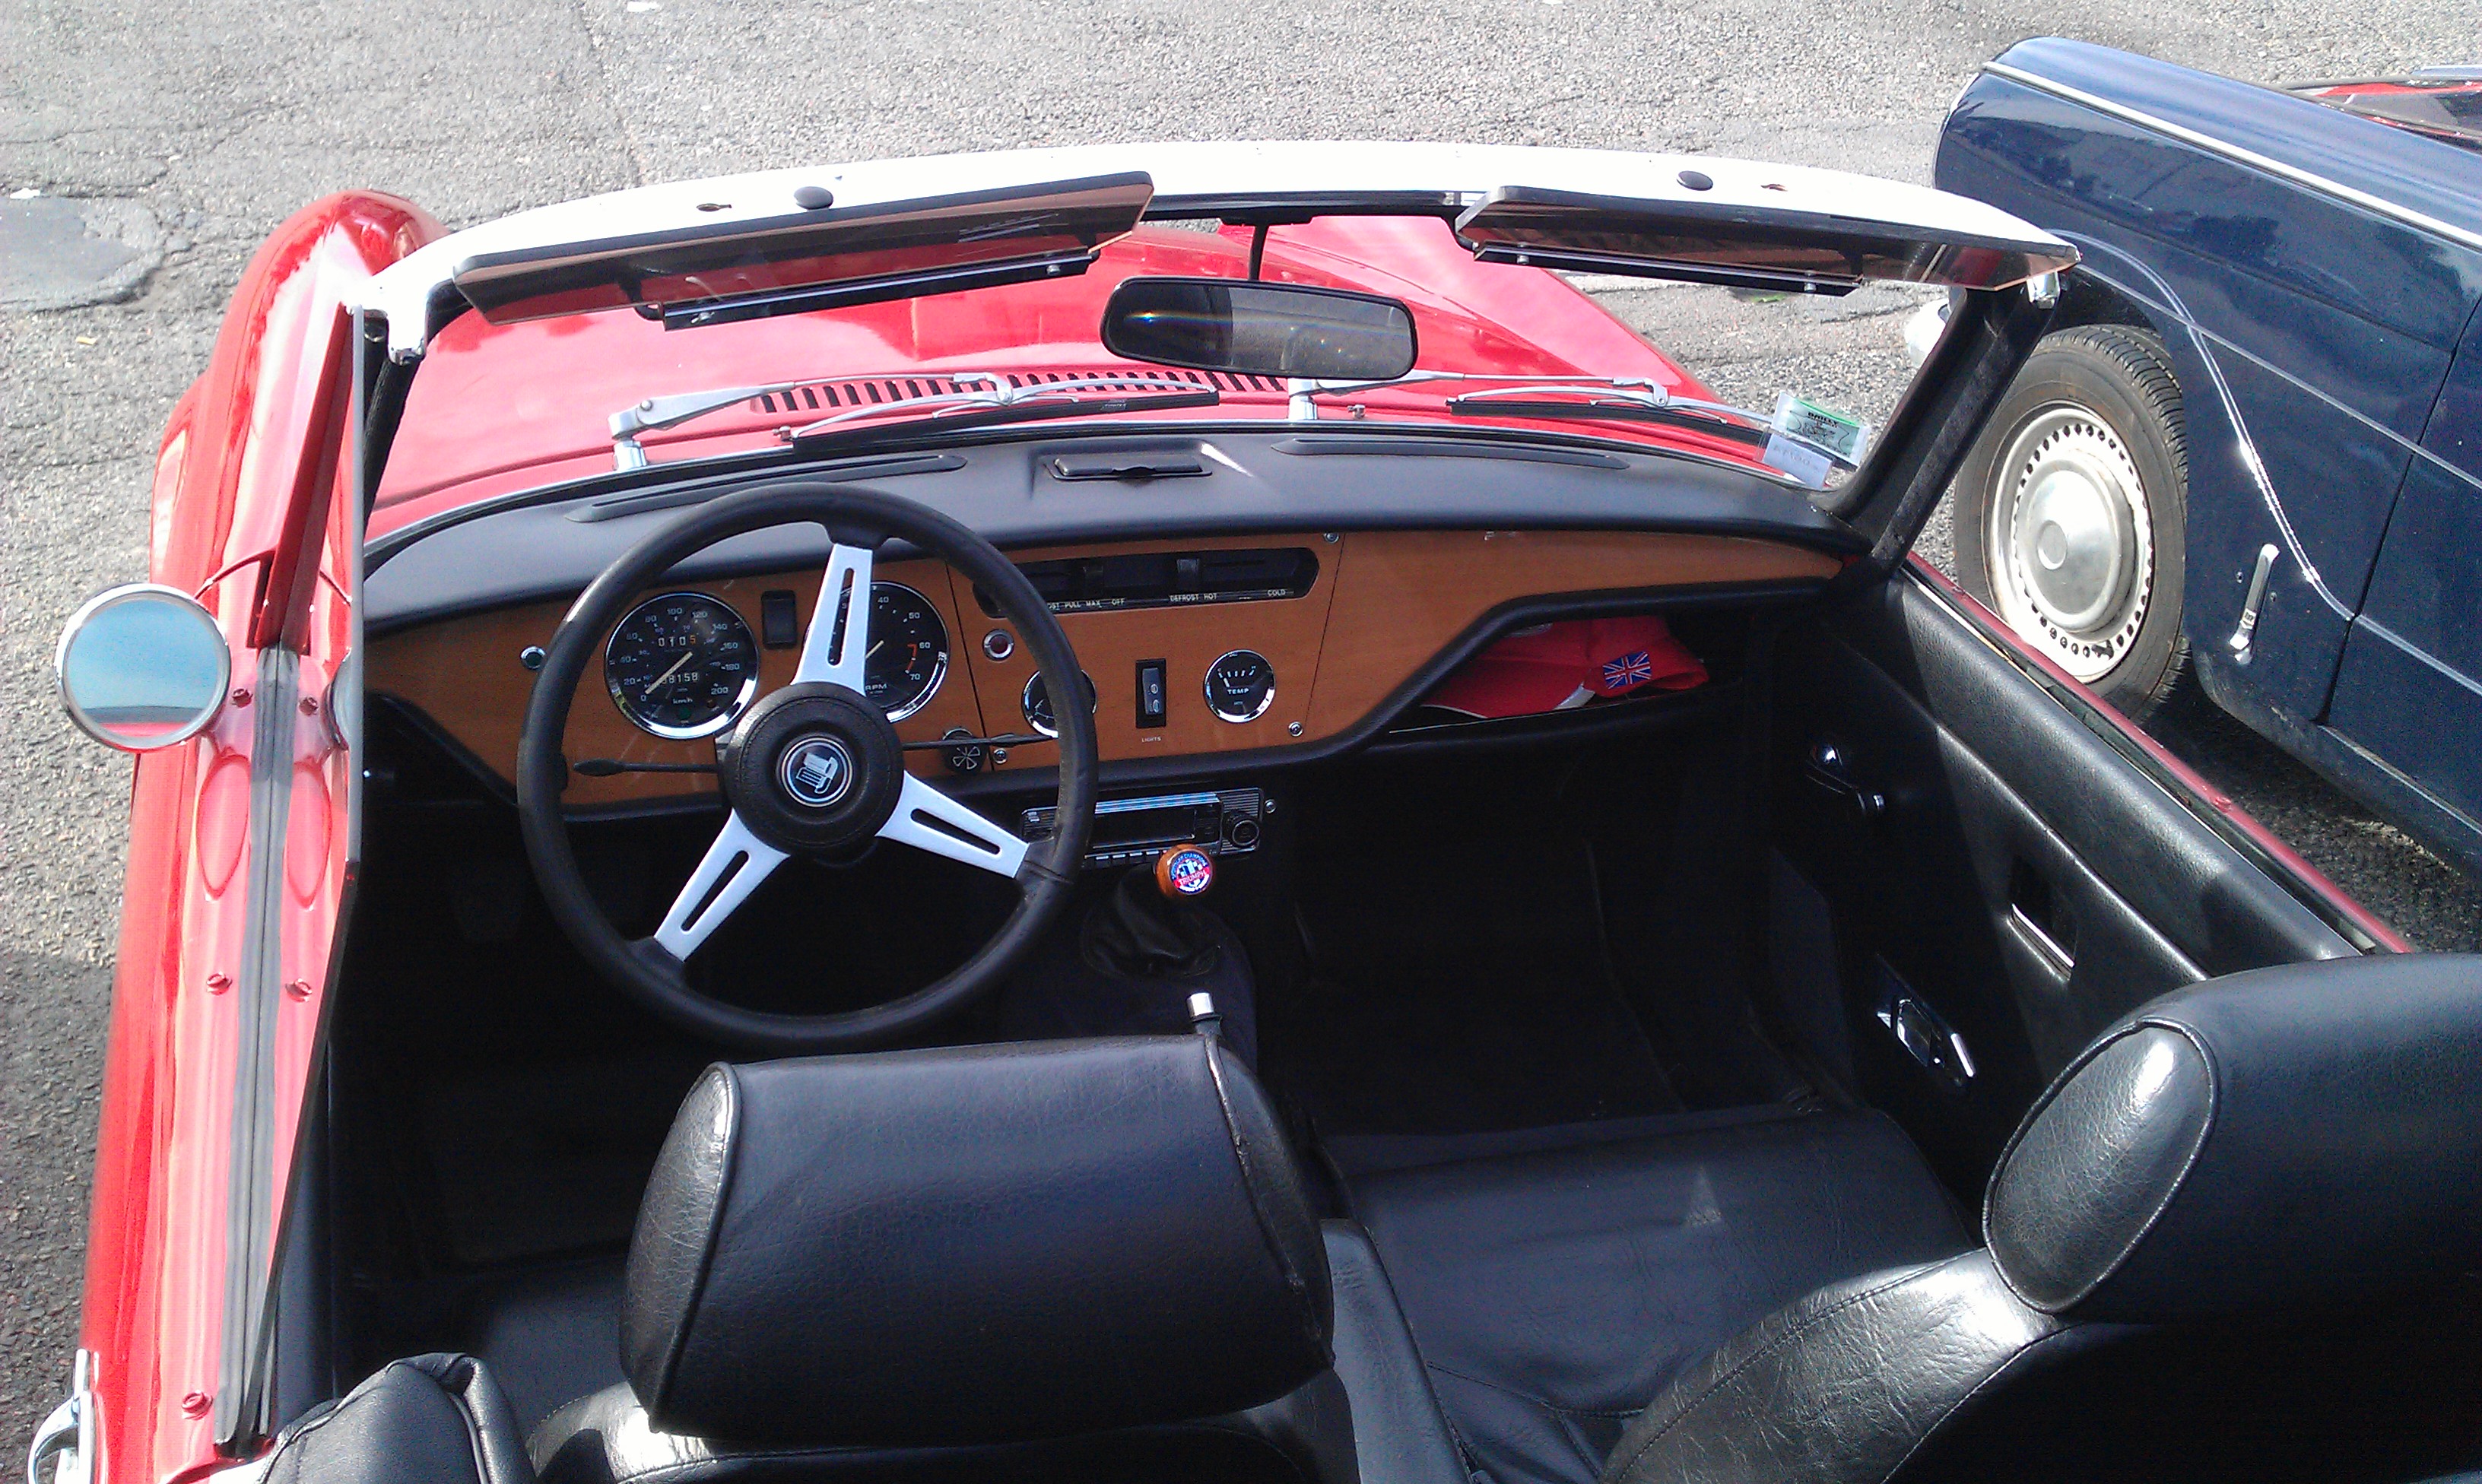 File:Triumph Spitfire MkIV after 1973 interior.jpg - Wikimedia Commons